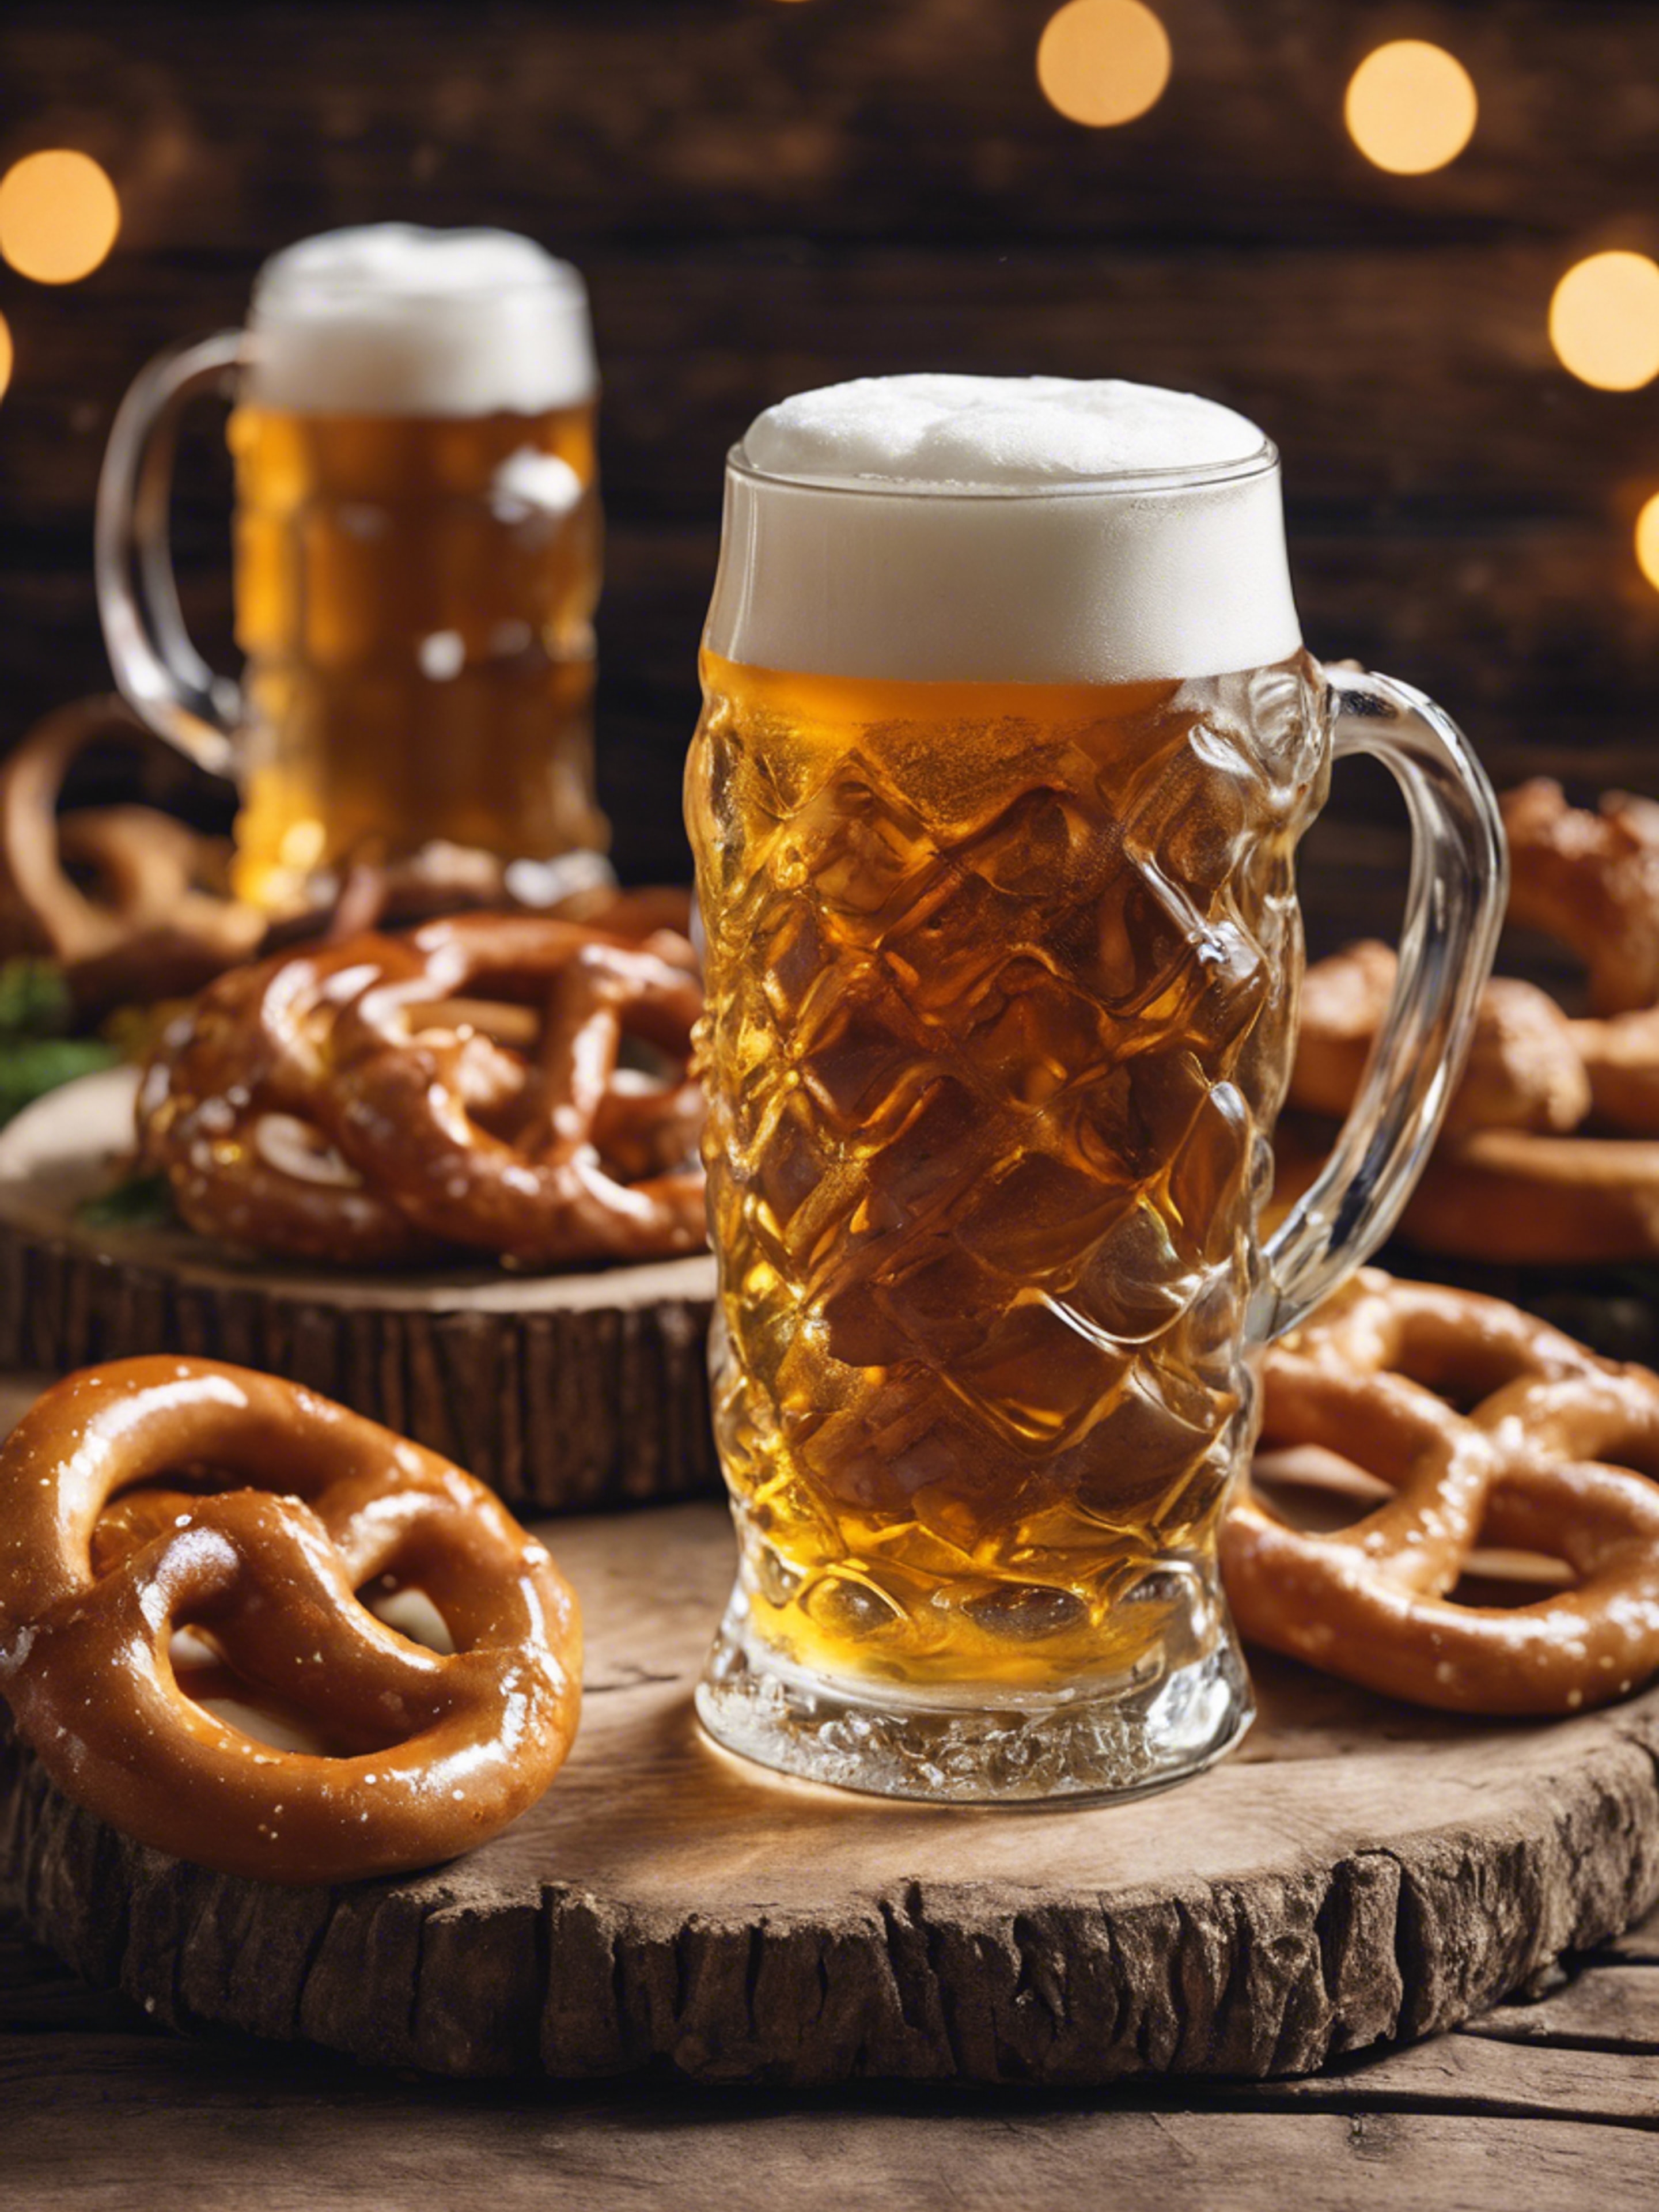 A foamy German beer, pretzels, and other Oktoberfest traditional foods on a rustic wooden table. Tapeta[8867ca72213c4237bd6d]